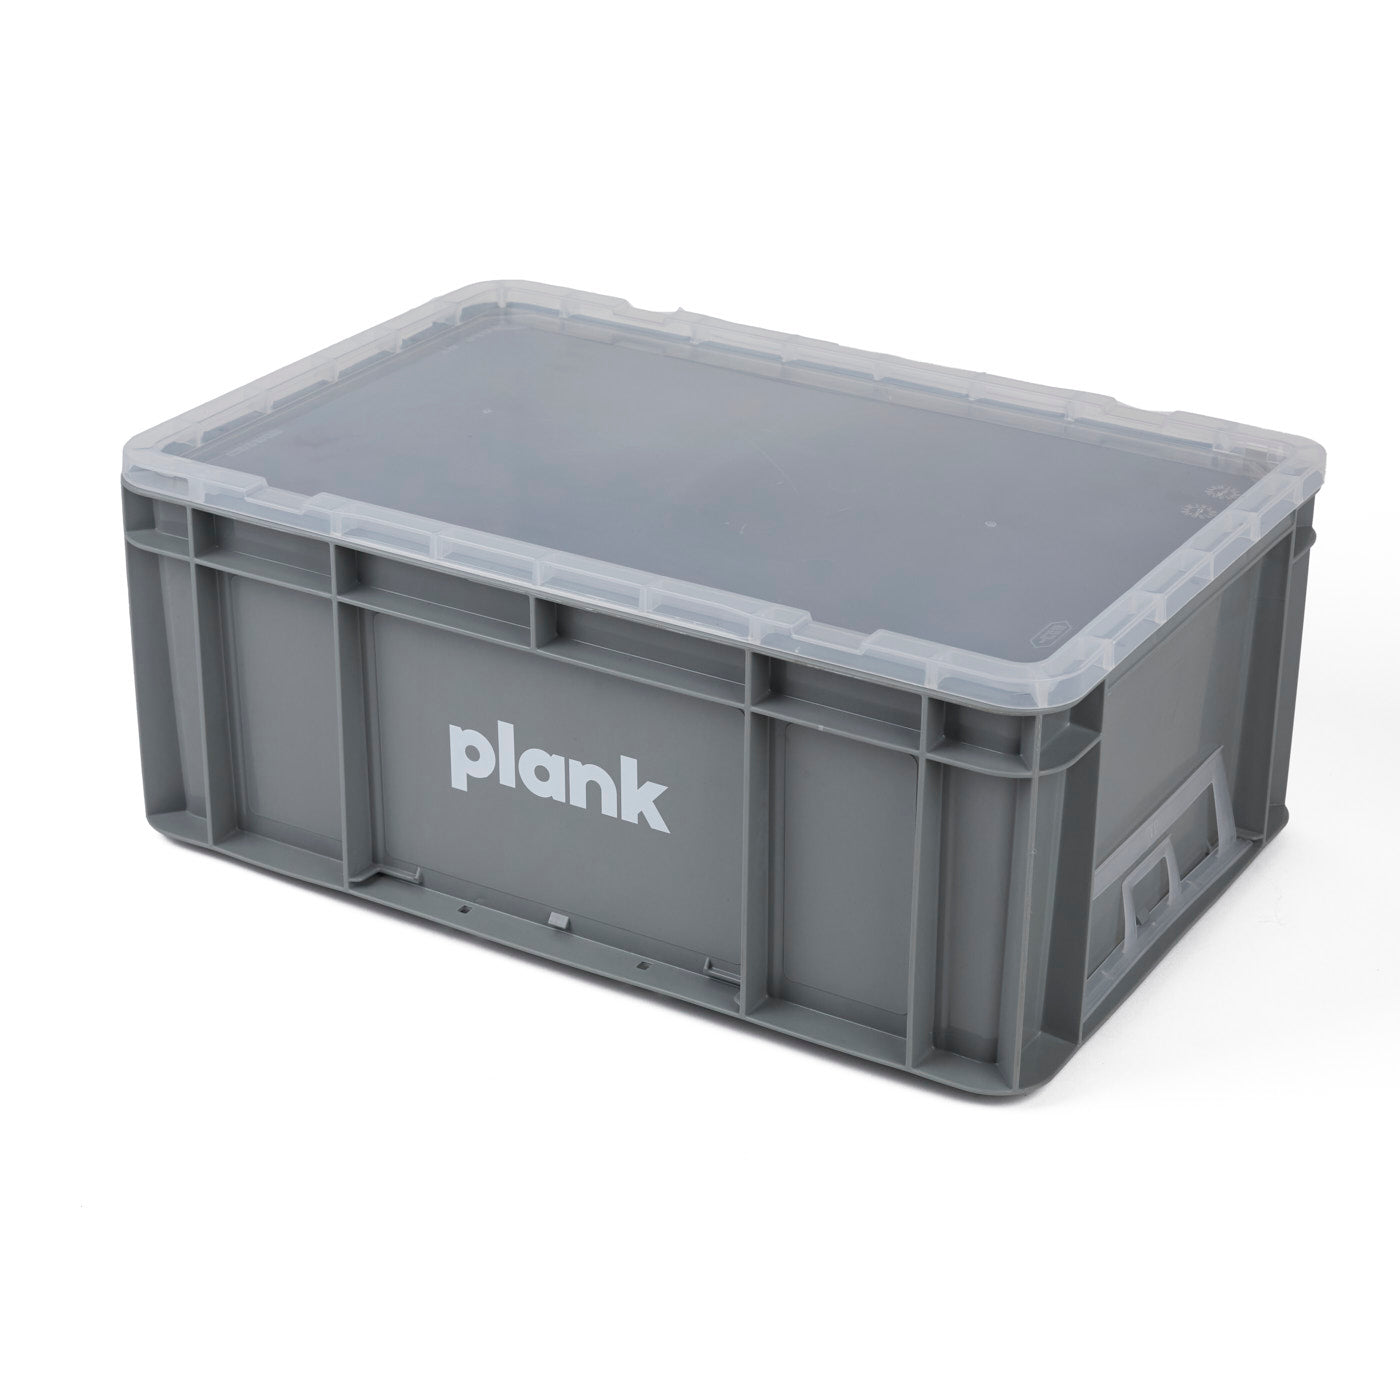 plank Storage Crates Covers